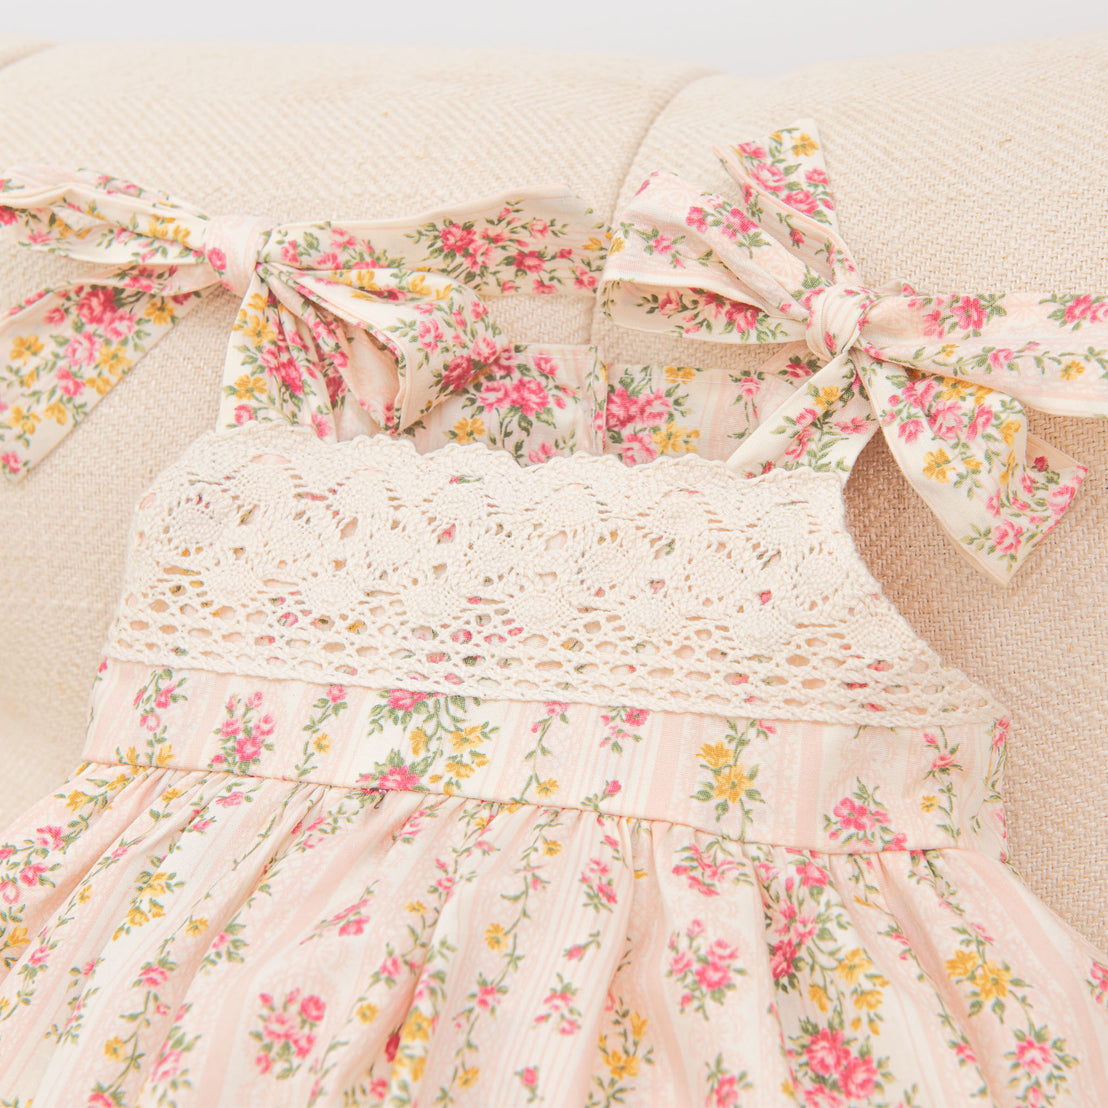 Flat lay of the Eloise Romper Dress in the "Blush" color. Details show the rose floral patterns and tie shoulder straps.